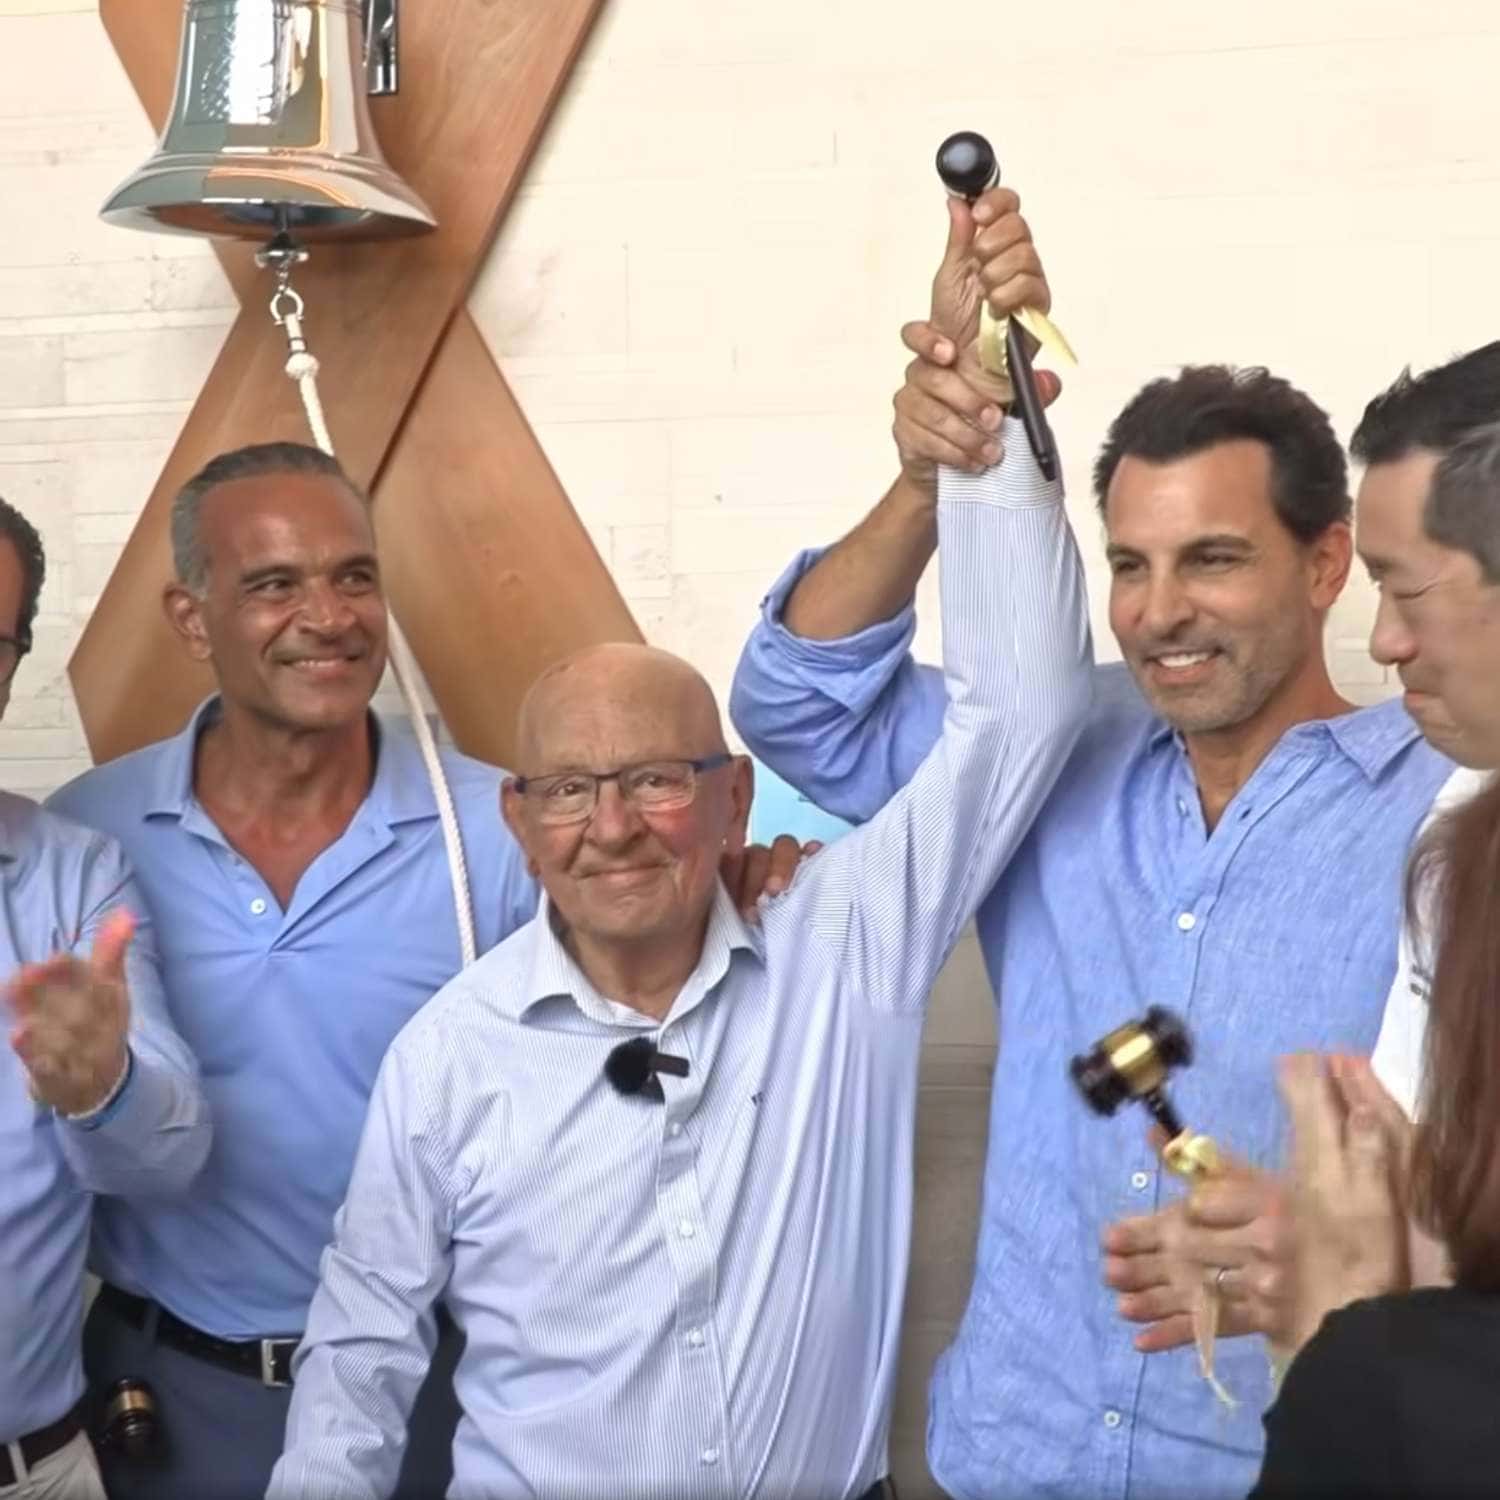 Judge Frank Caprio Triumphs Over Cancer and Rings the Bell of Healing